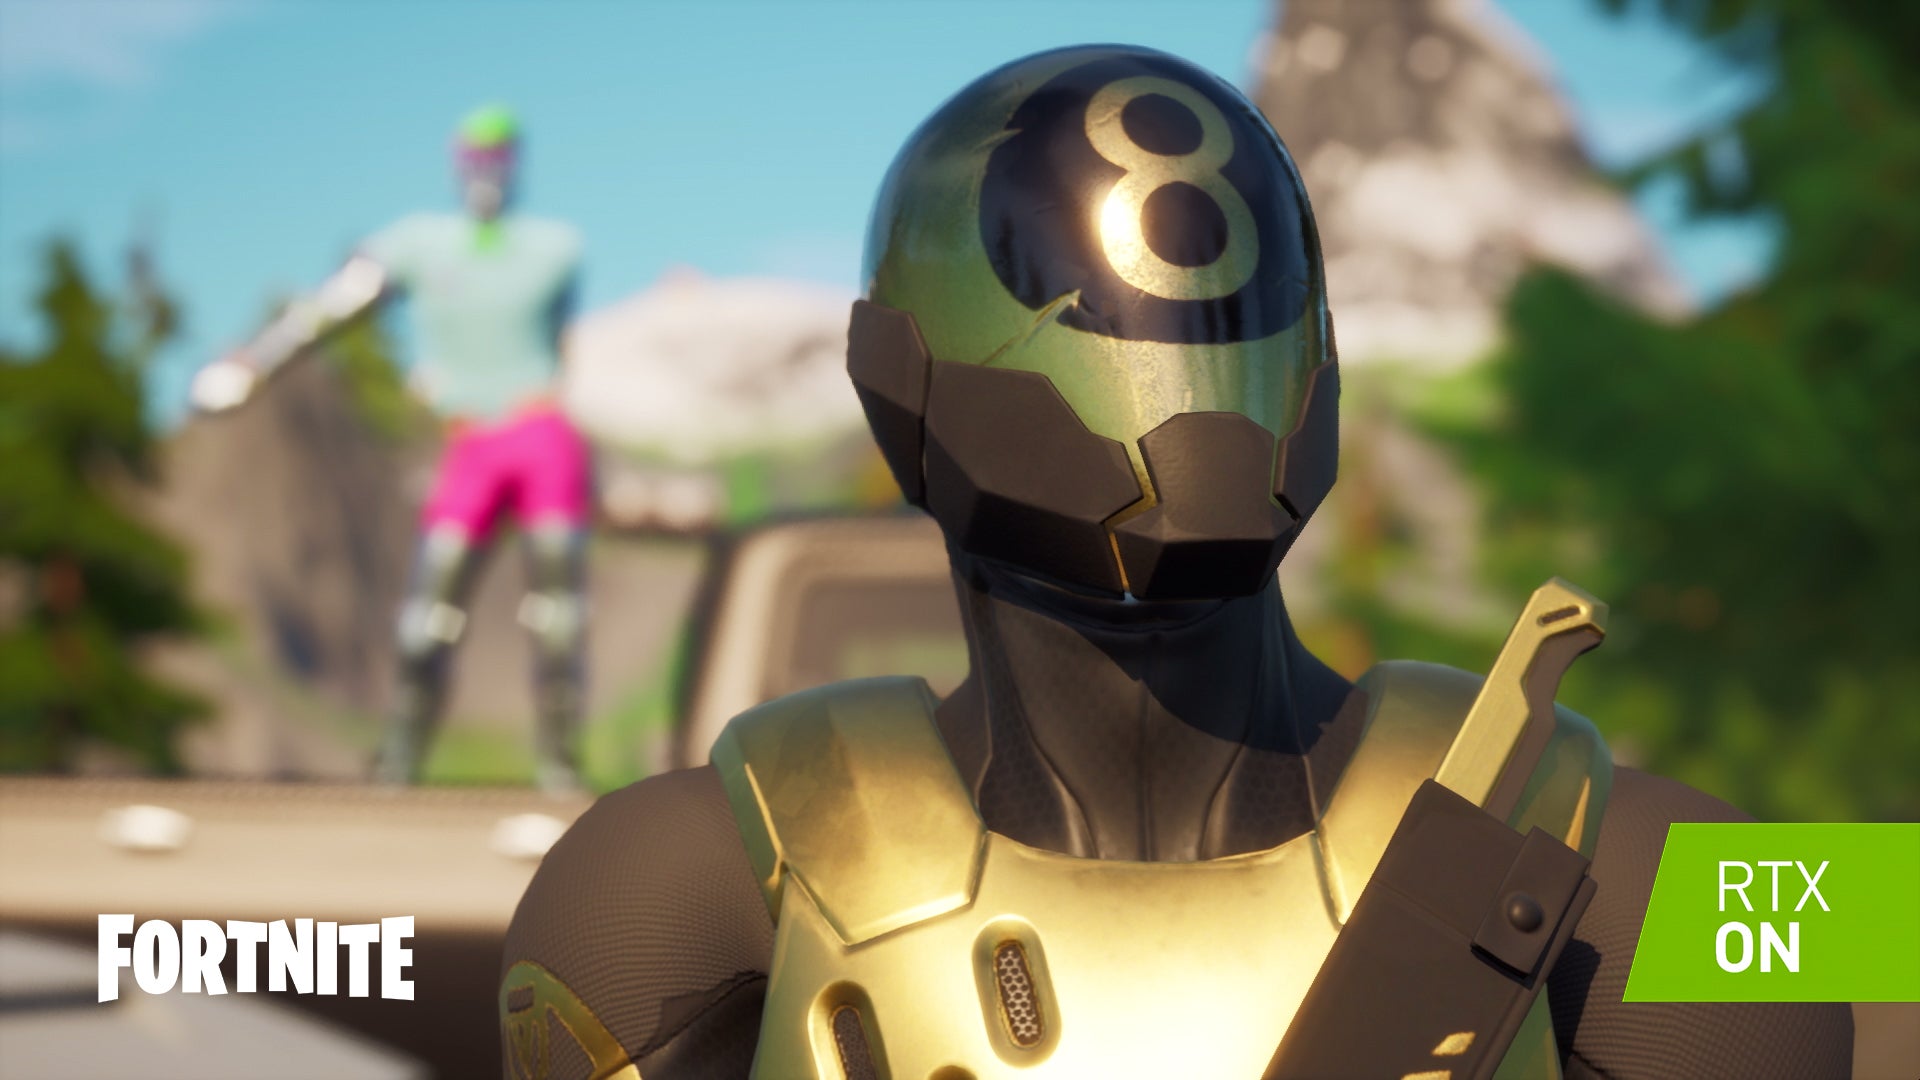 Image for Fortnite arrives next week on Xbox Series X/S and PS5 with all-new visual improvements, better loading times and enhanced split-screen